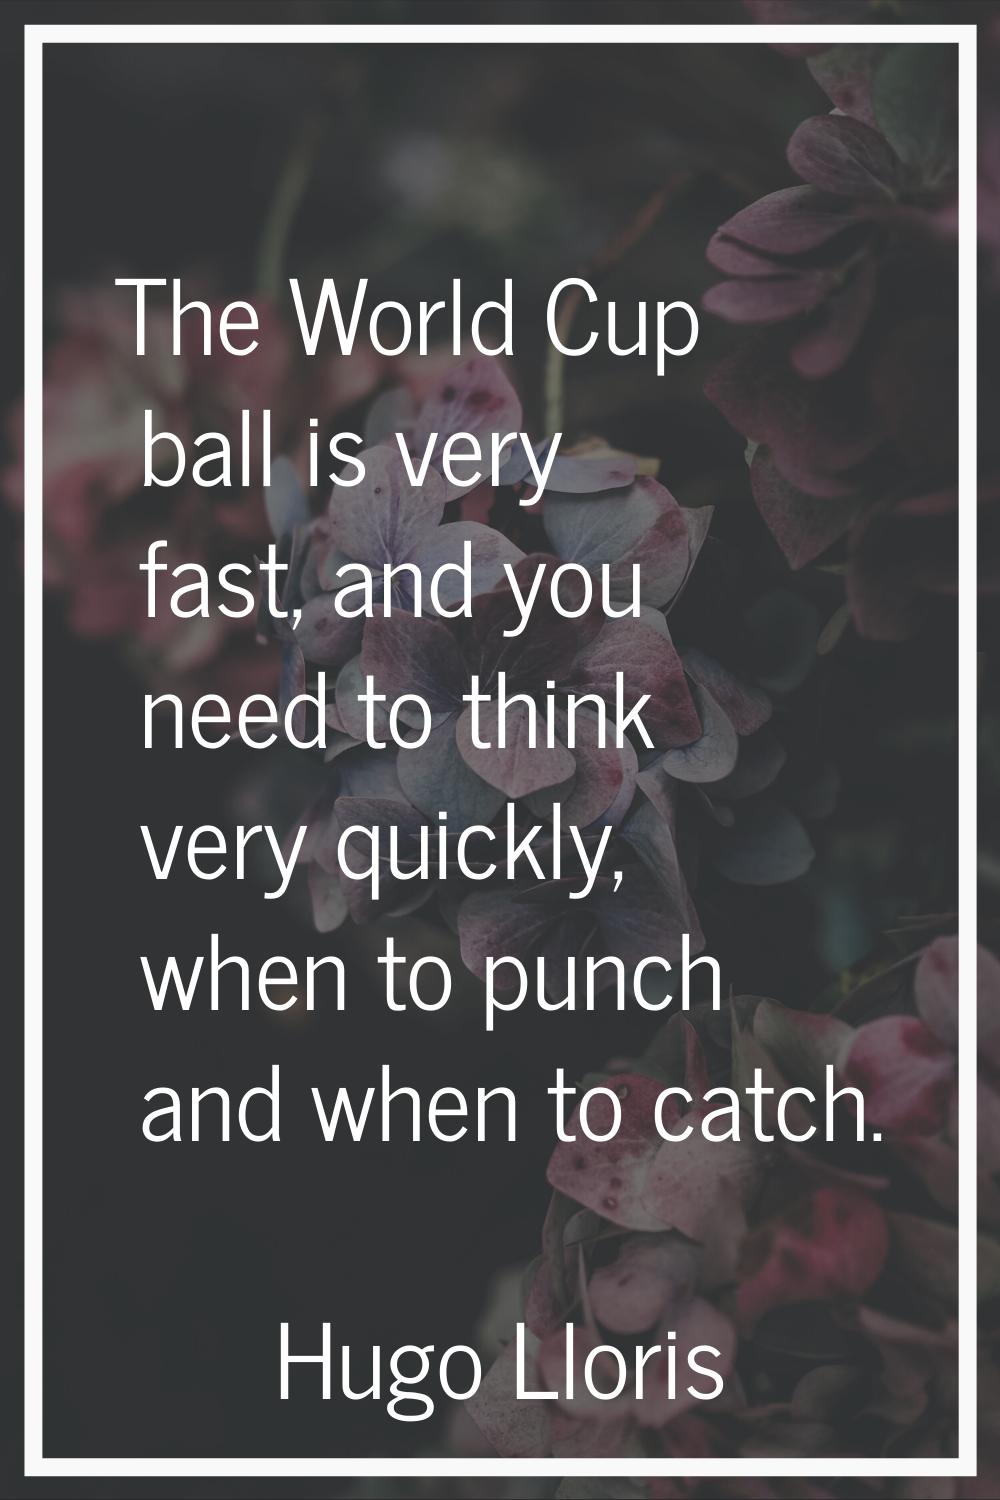 The World Cup ball is very fast, and you need to think very quickly, when to punch and when to catc